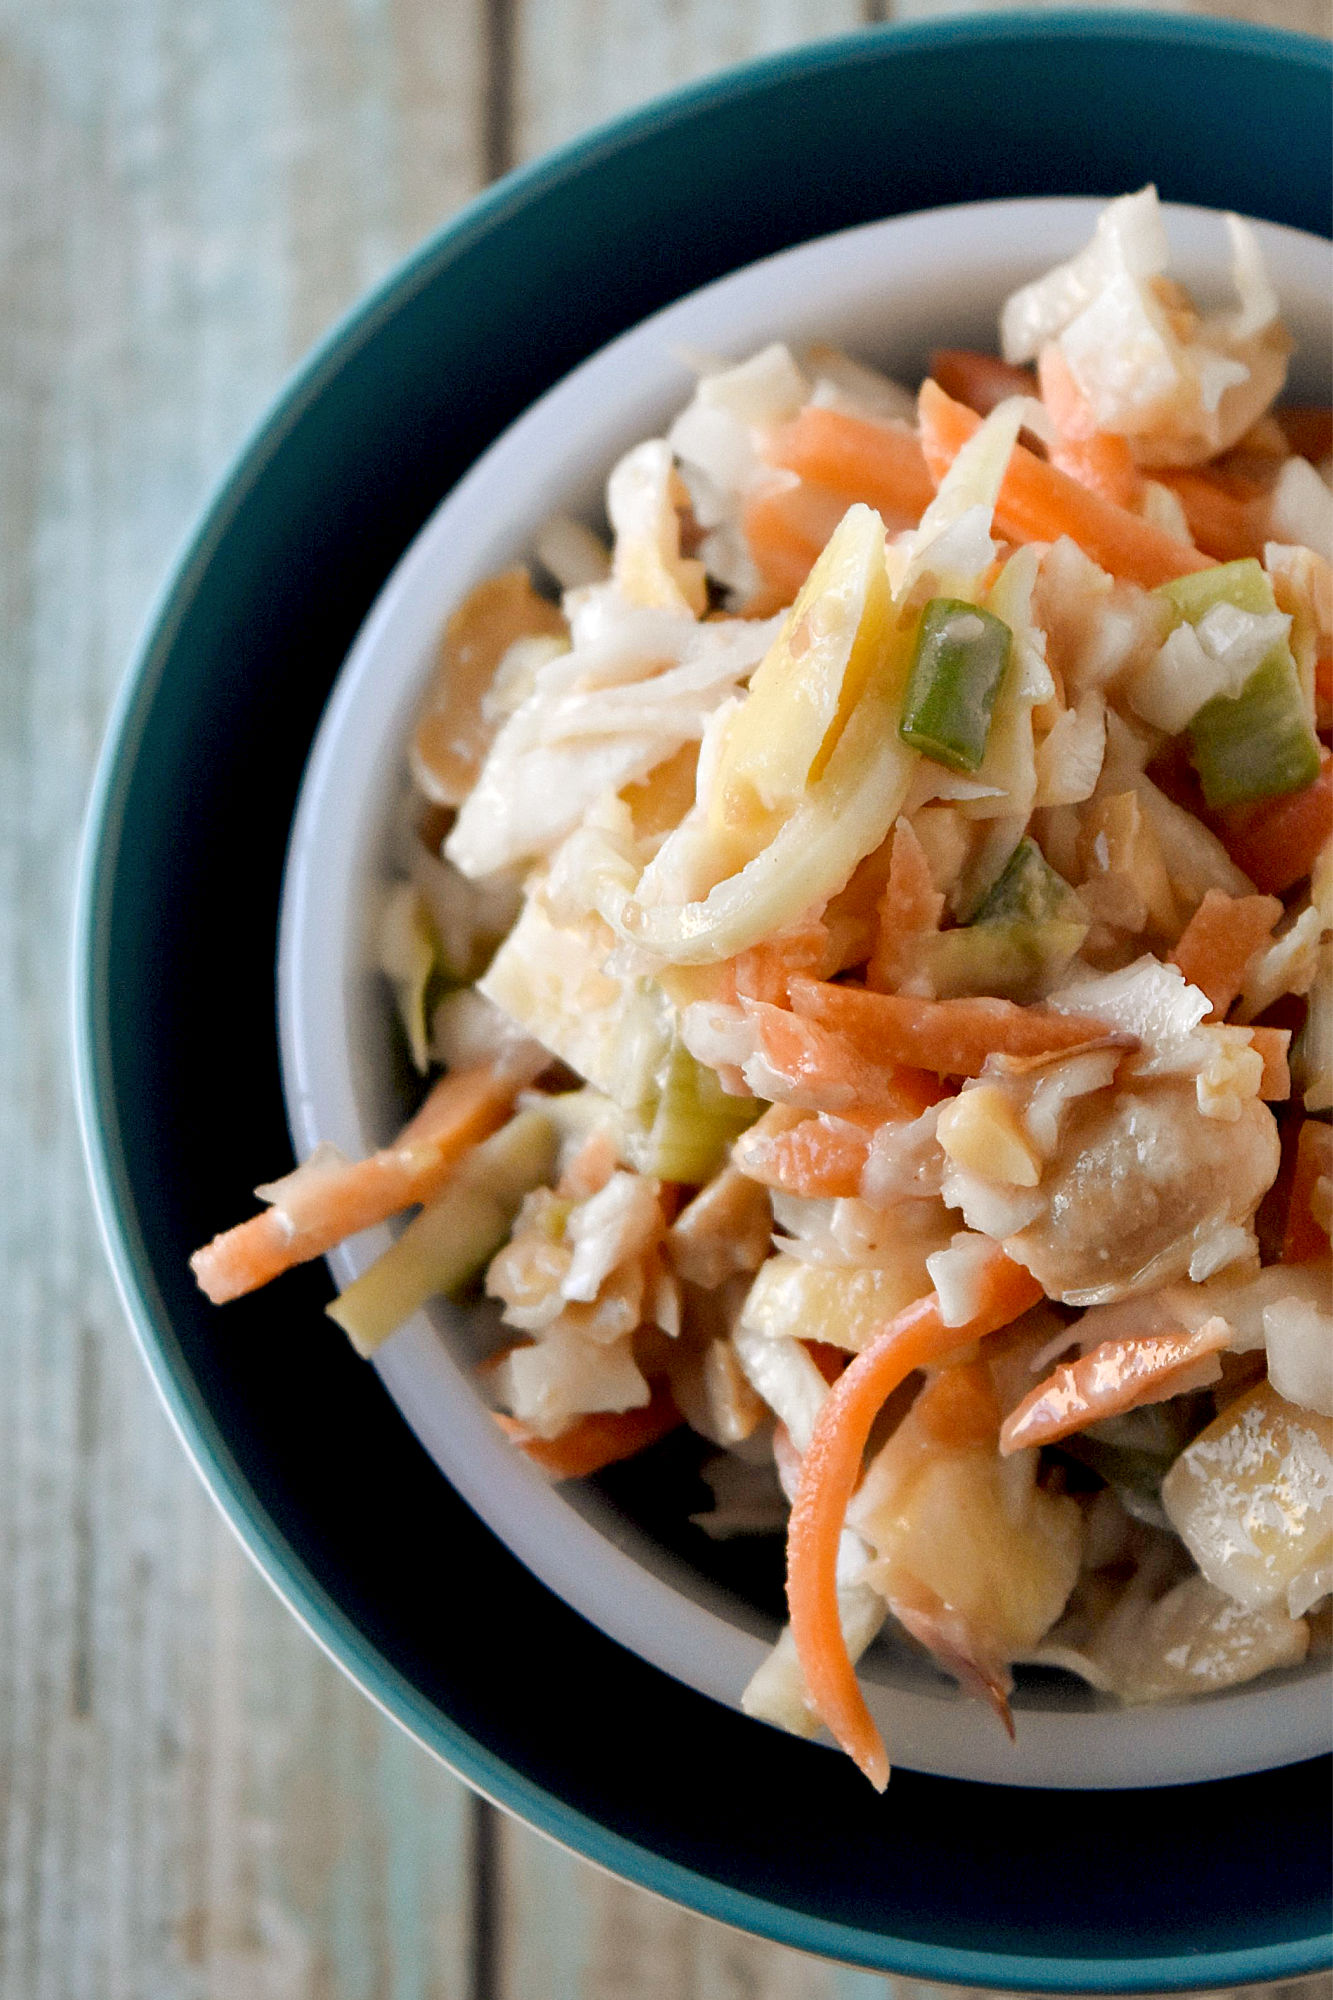 Carrot Peanut Slaw has a twist on a southern classic. This slaw is lime juice, grated ginger, and chopped dried mango for a tropical twist to the classic side dish. #HolidaySideDishes